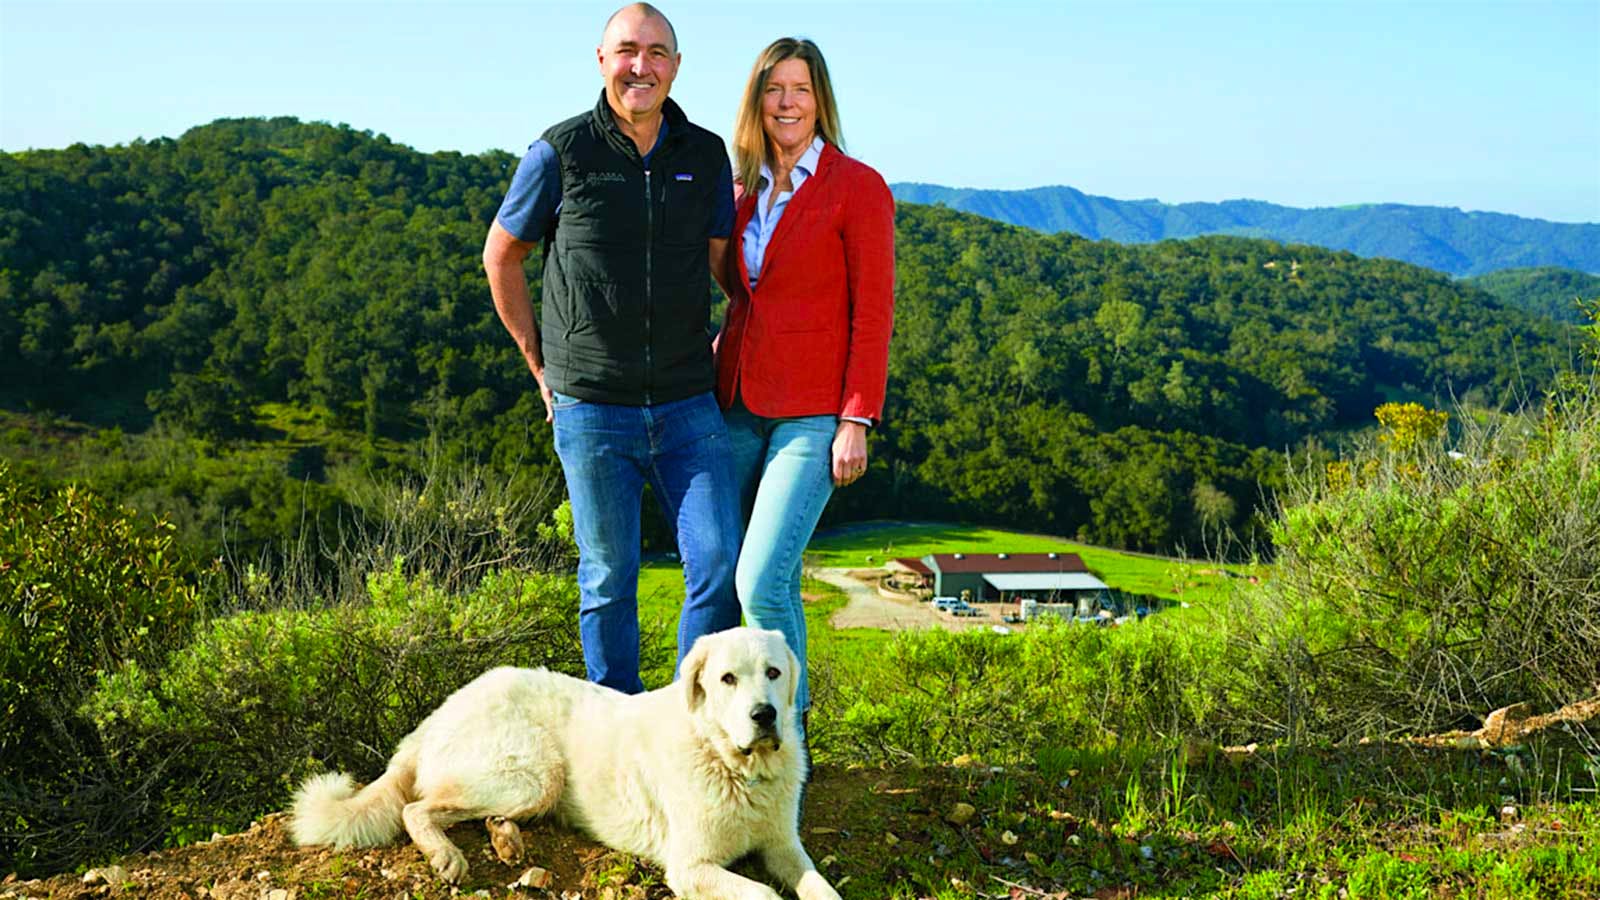 The owners with a large white dog at their feet